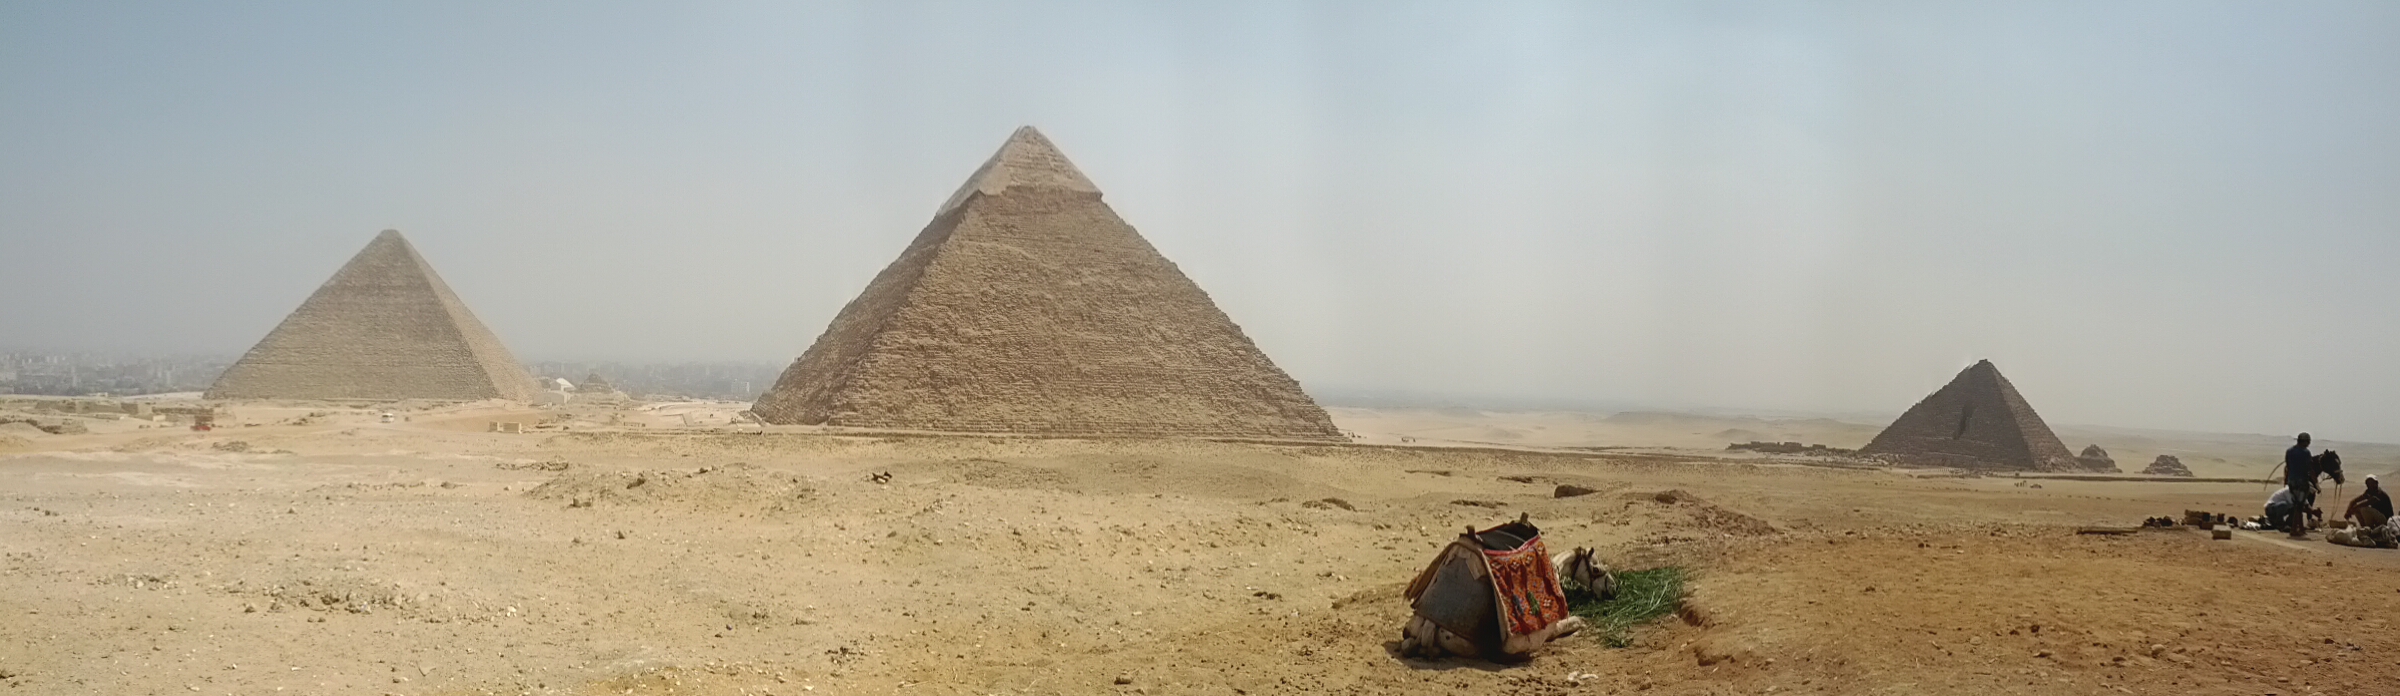 How to Stay Safe at The Pyramids